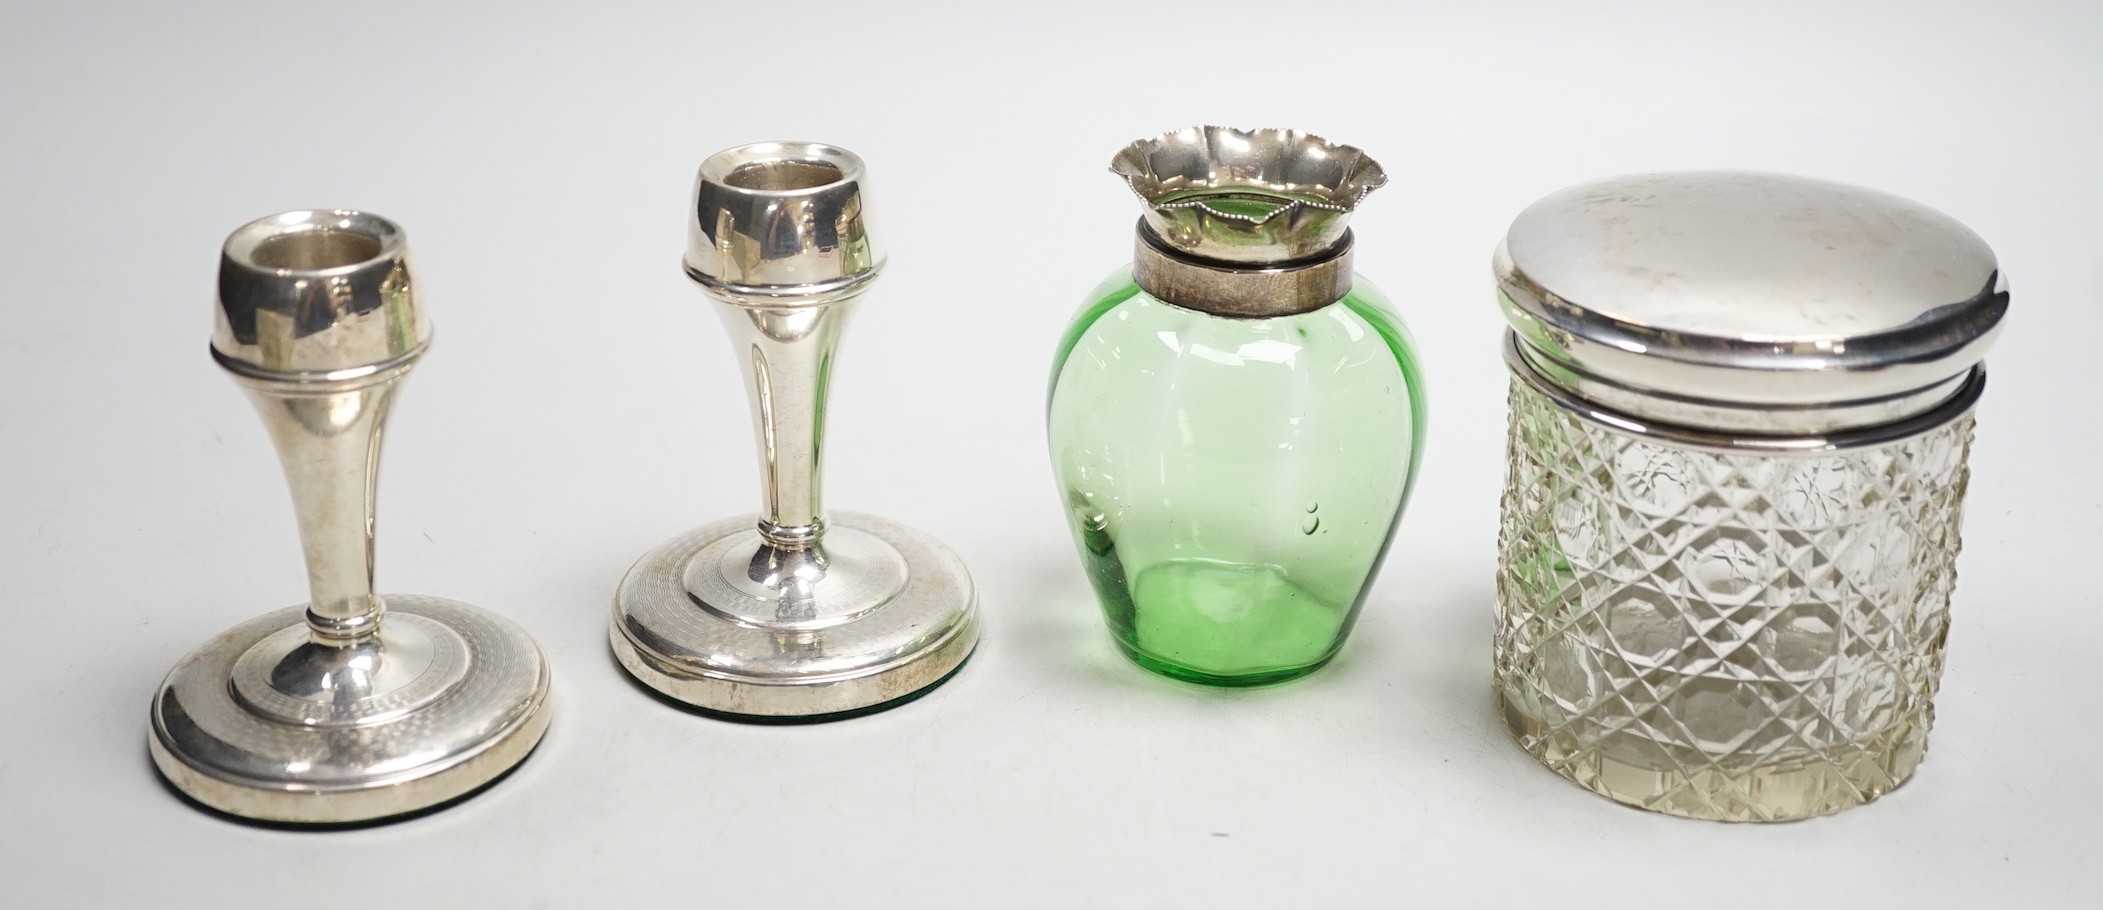 A pair of mid 20th century silver mounted dwarf candlesticks, 92mm, a silver mounted glass jar and a green glass vase.                                                                                                      